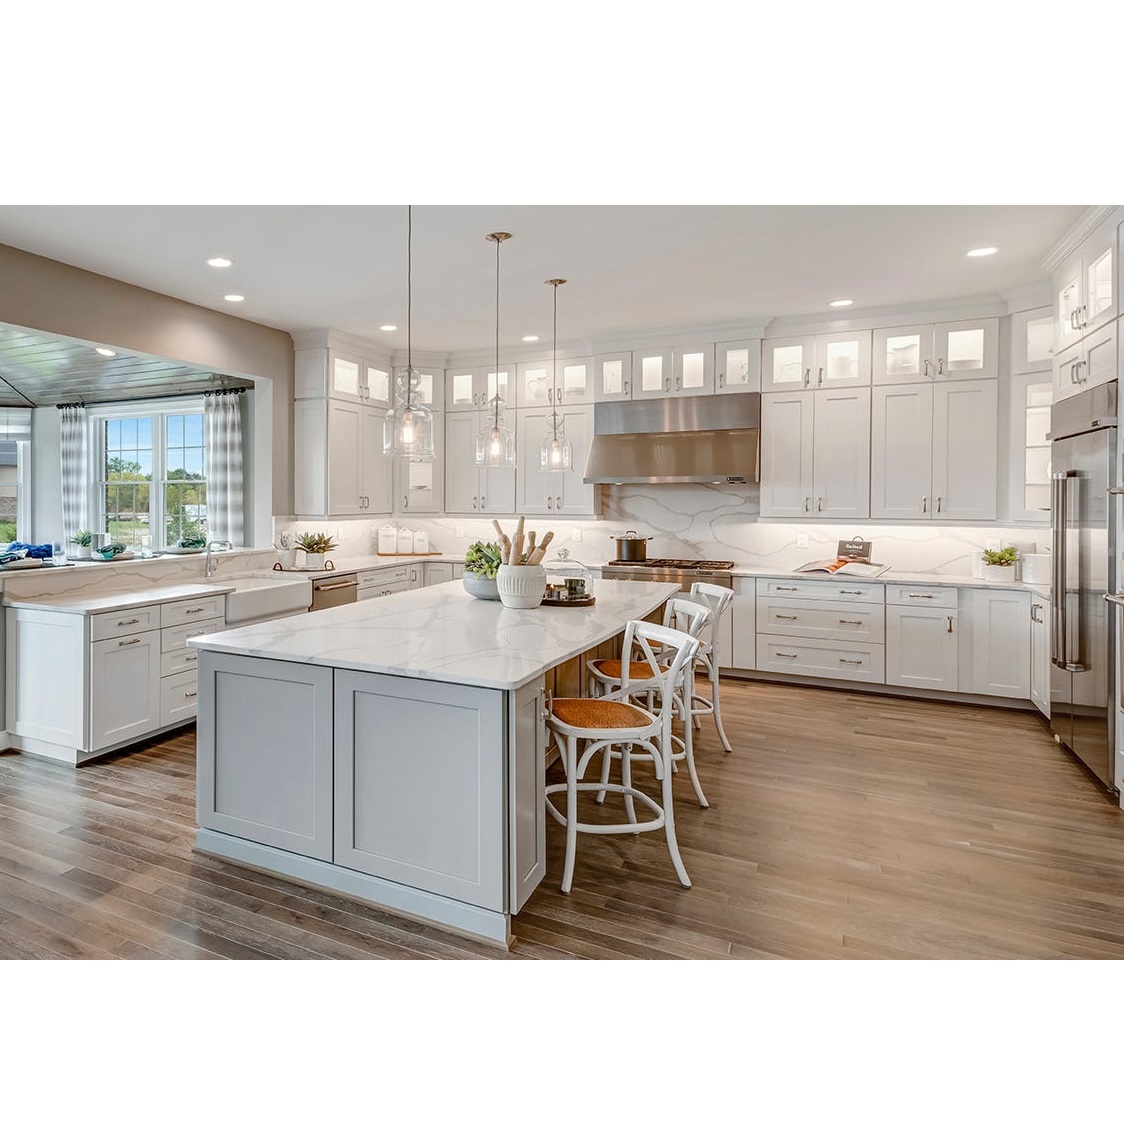 American solid wood kitchen cabinets design 